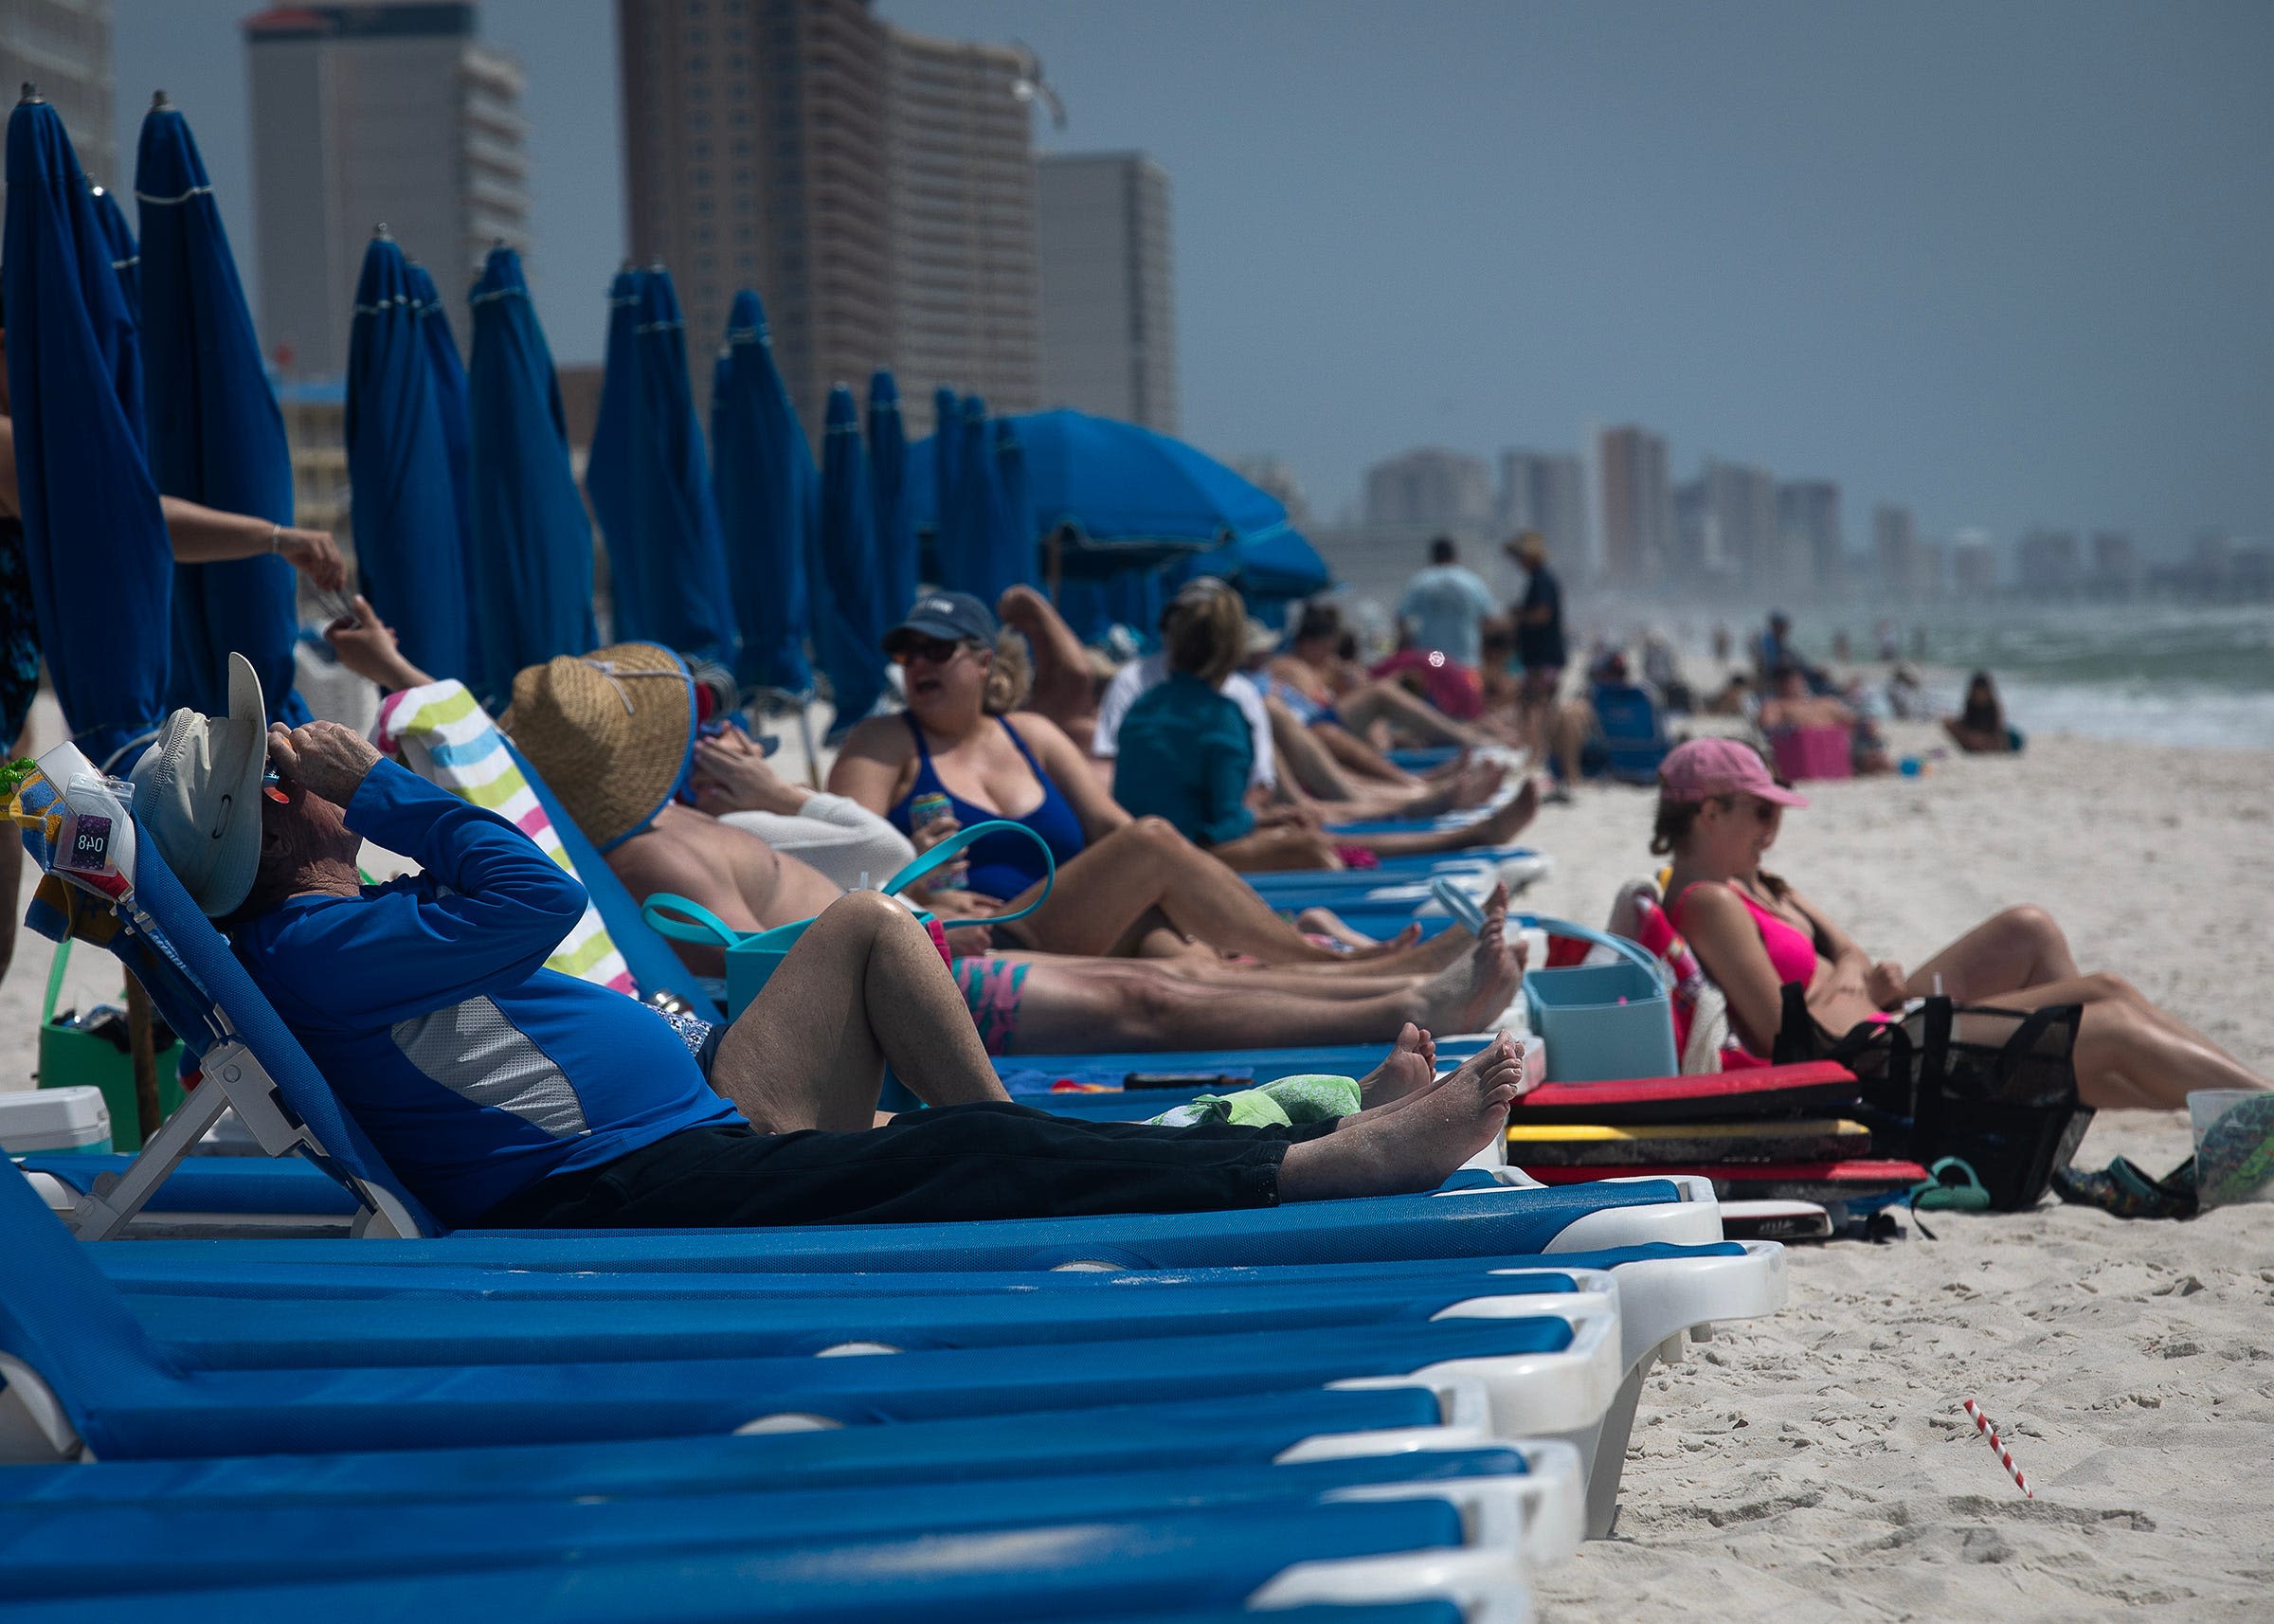 AccuWeather predicts hotter summer for most of US. Here are tips to prepare from NOAA